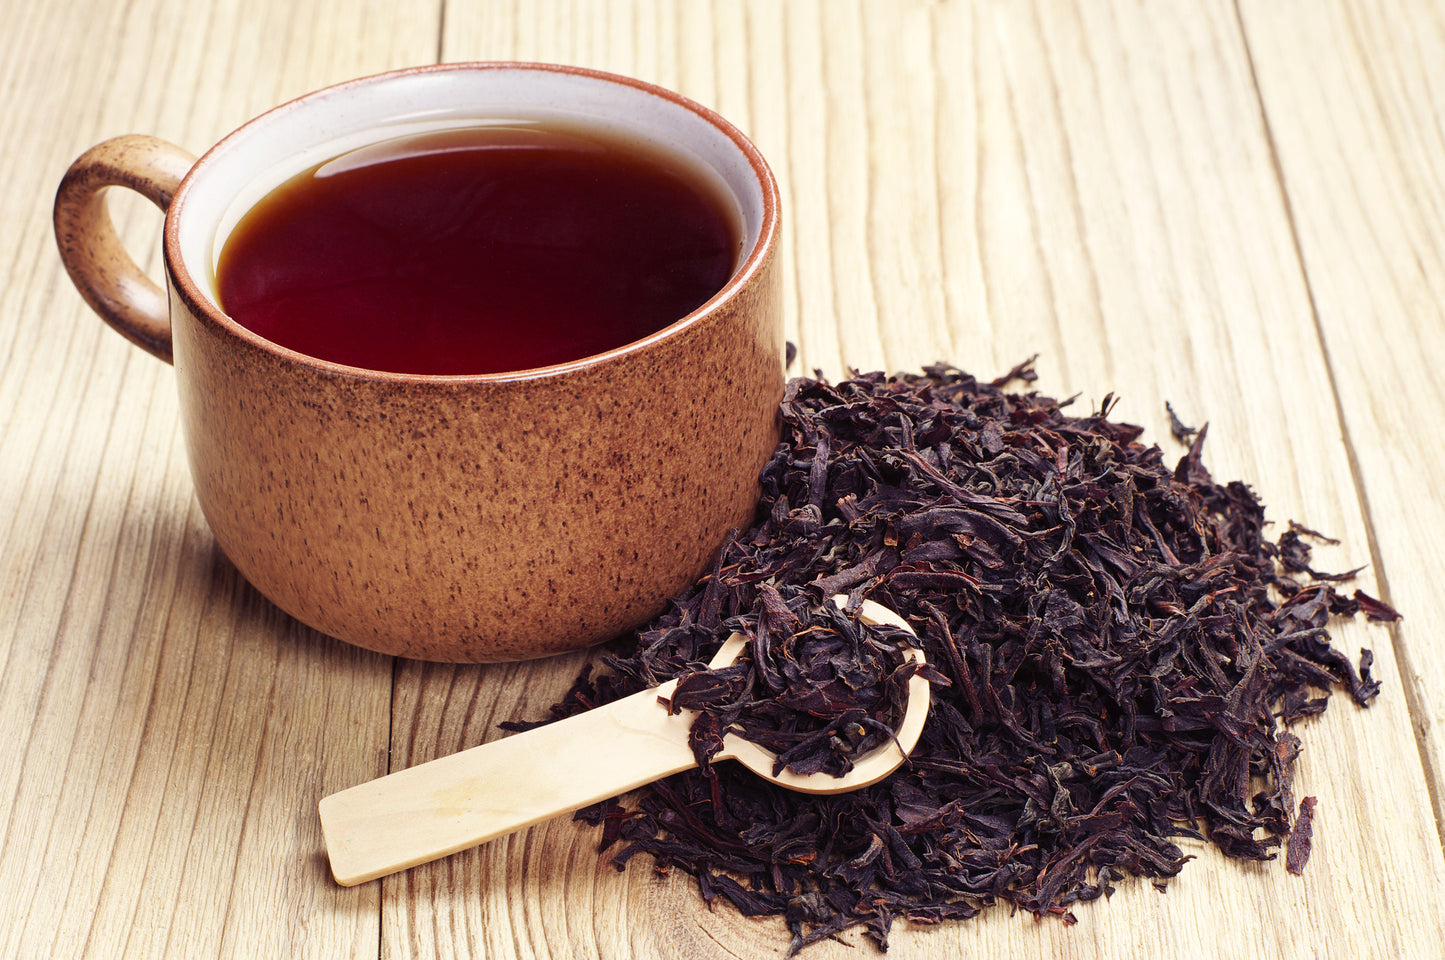 The Beginners’ Guide to Lapsang Souchong – Everything You Should Know